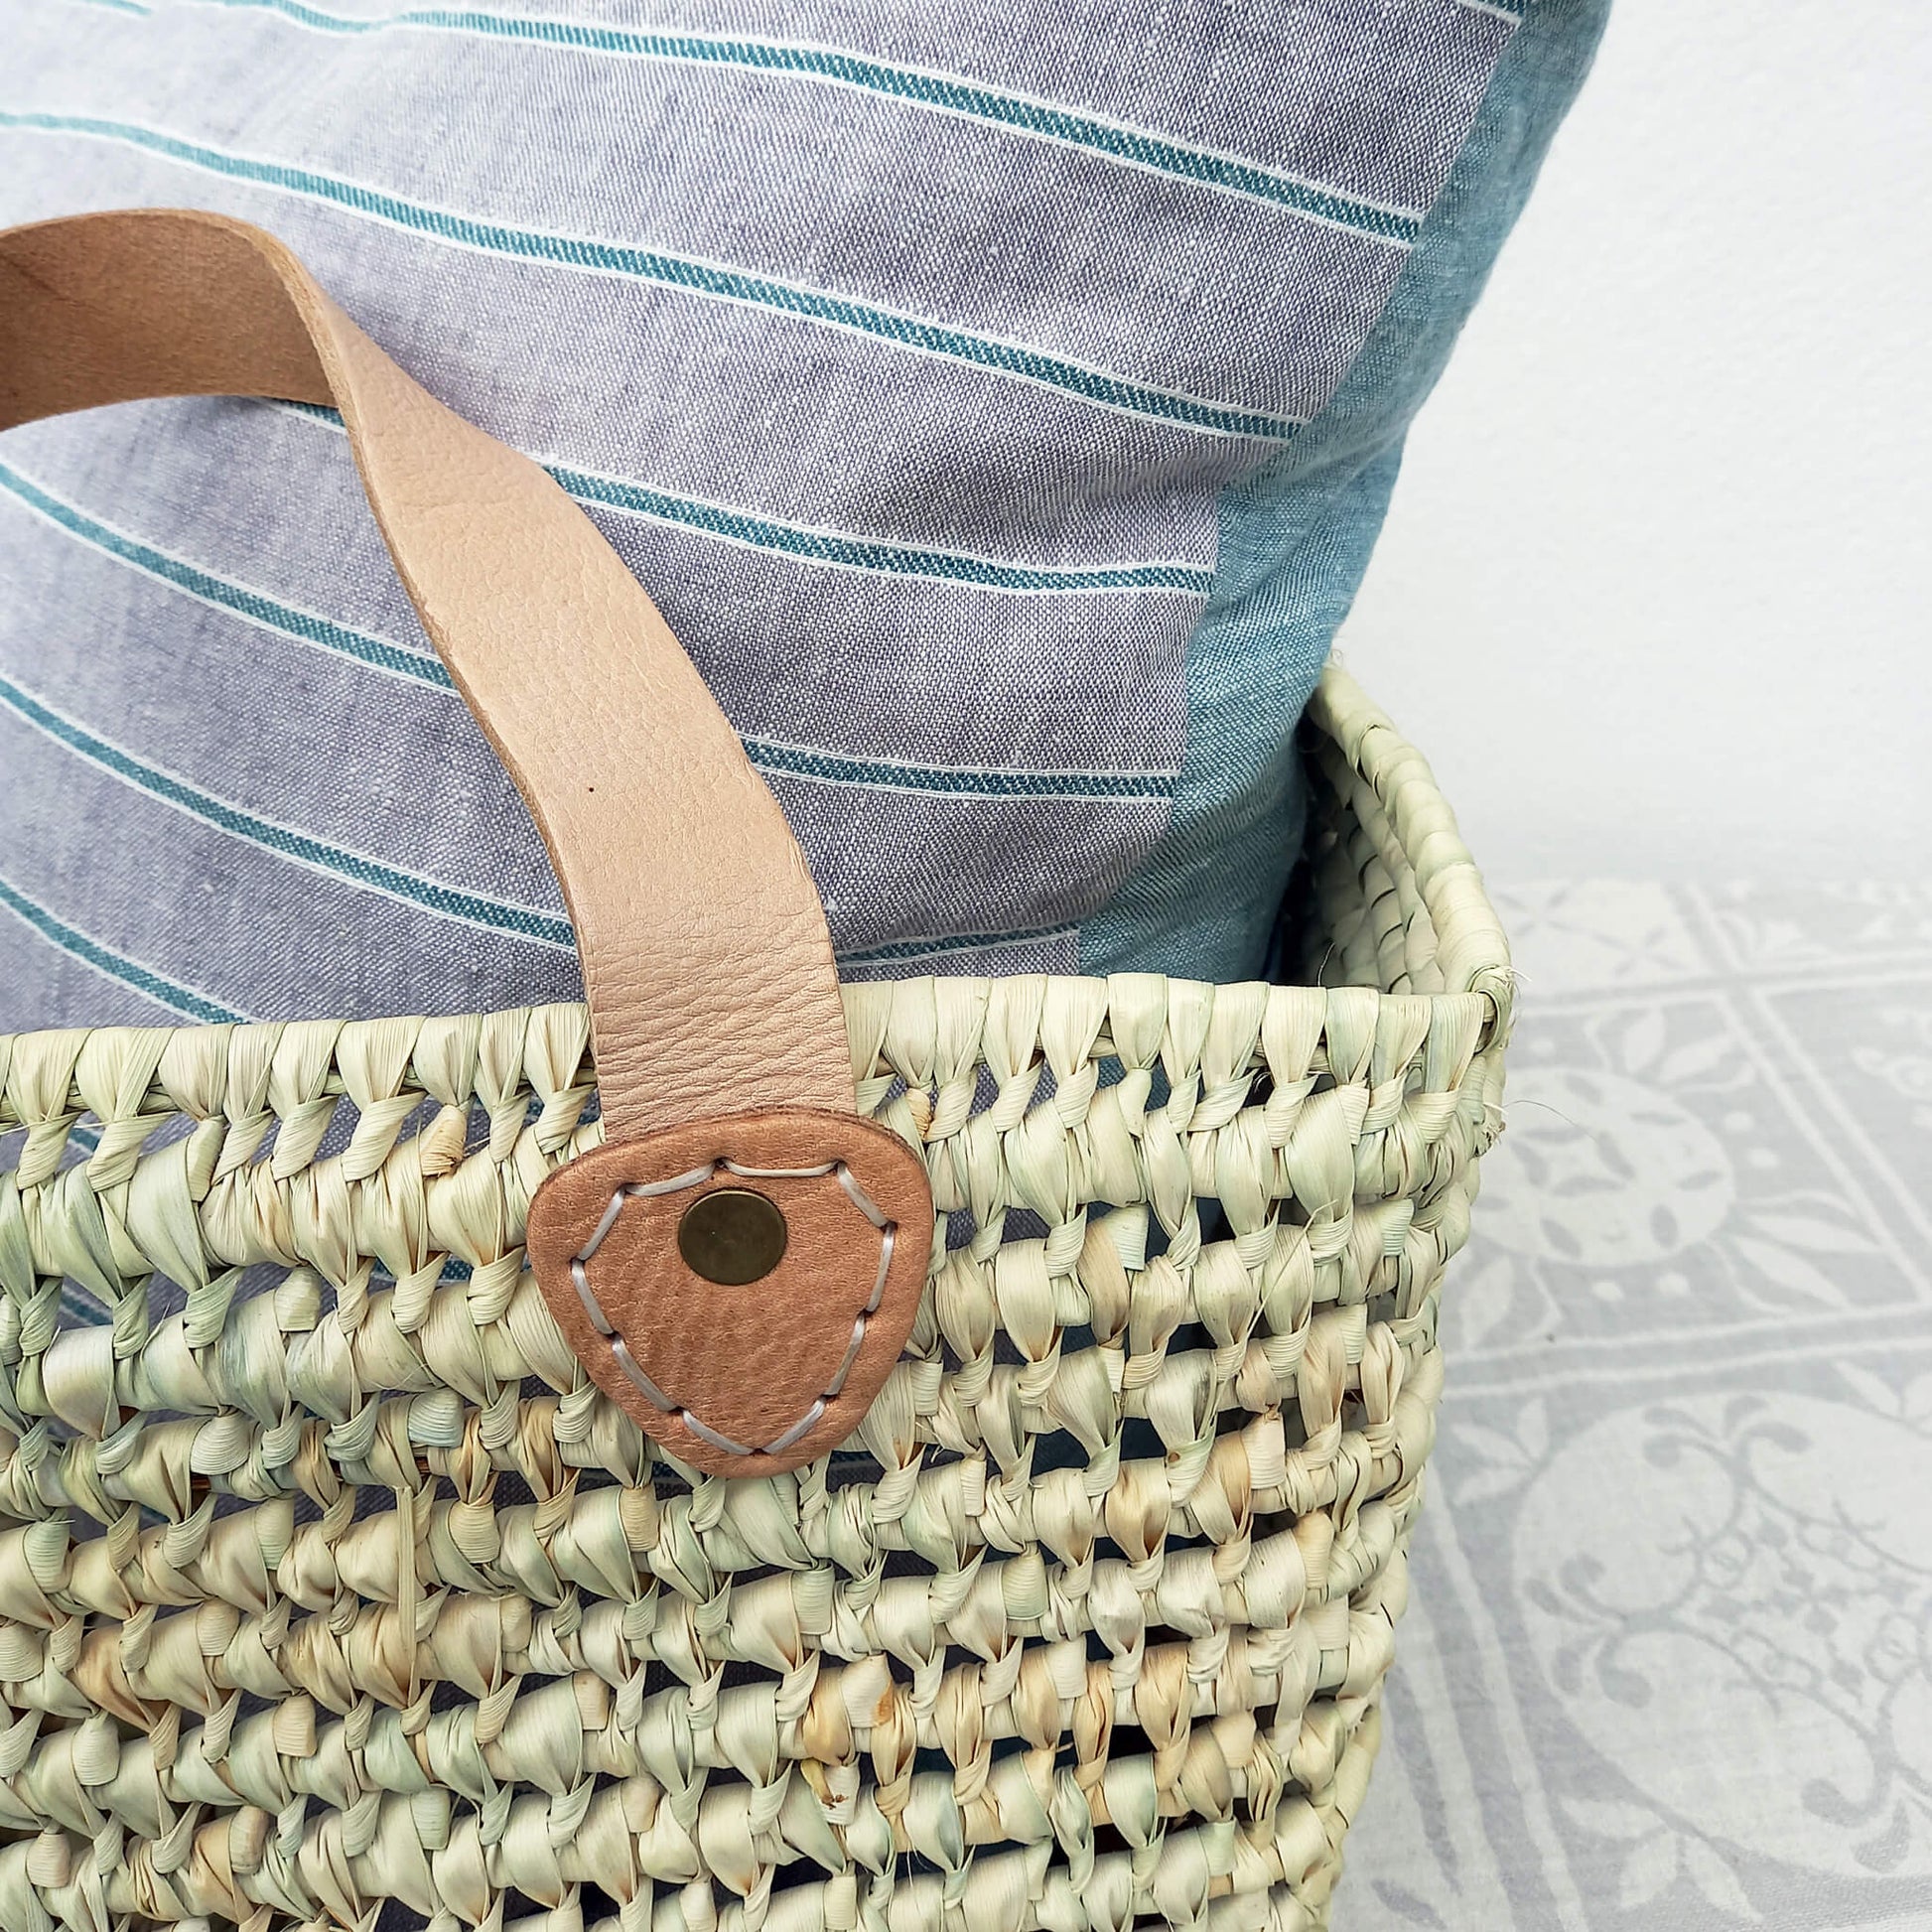 Basket Gap 3 sizes natural and handwoven - Unik by Nature